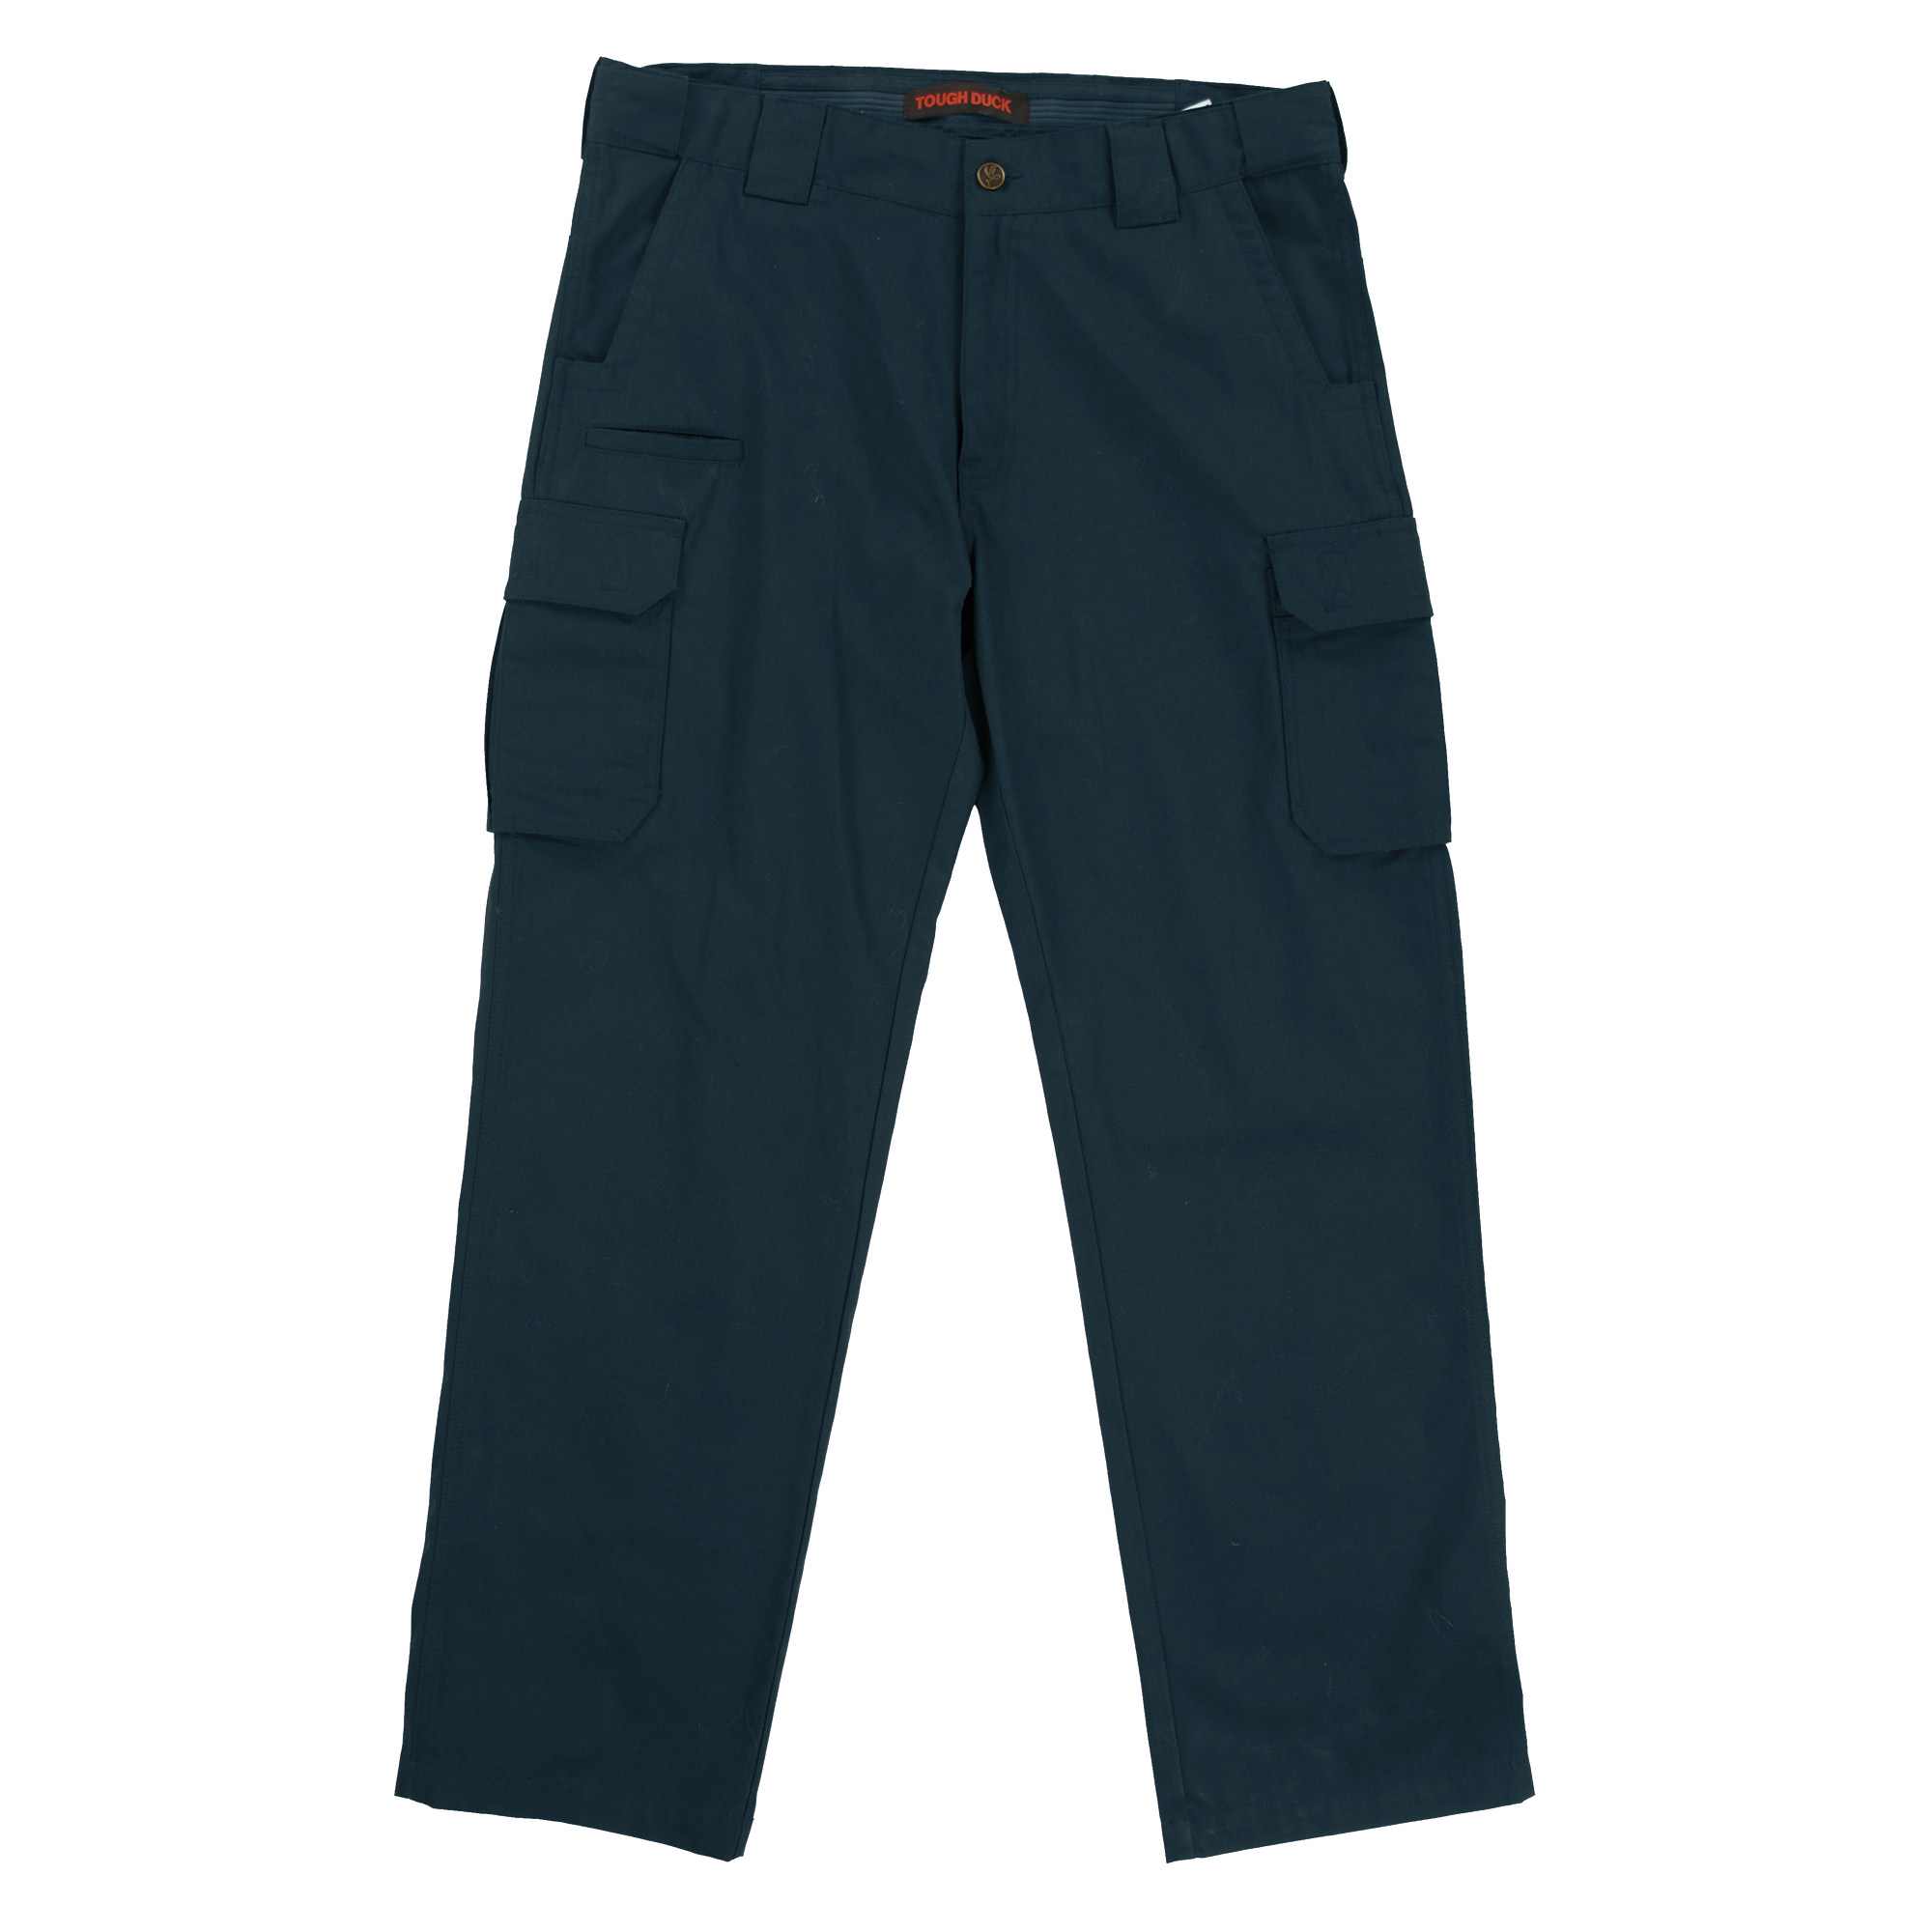 Tough Duck, Ripstop Cargo Pant, Waist 42 in, Inseam 34 in, Color Navy, Model WP113